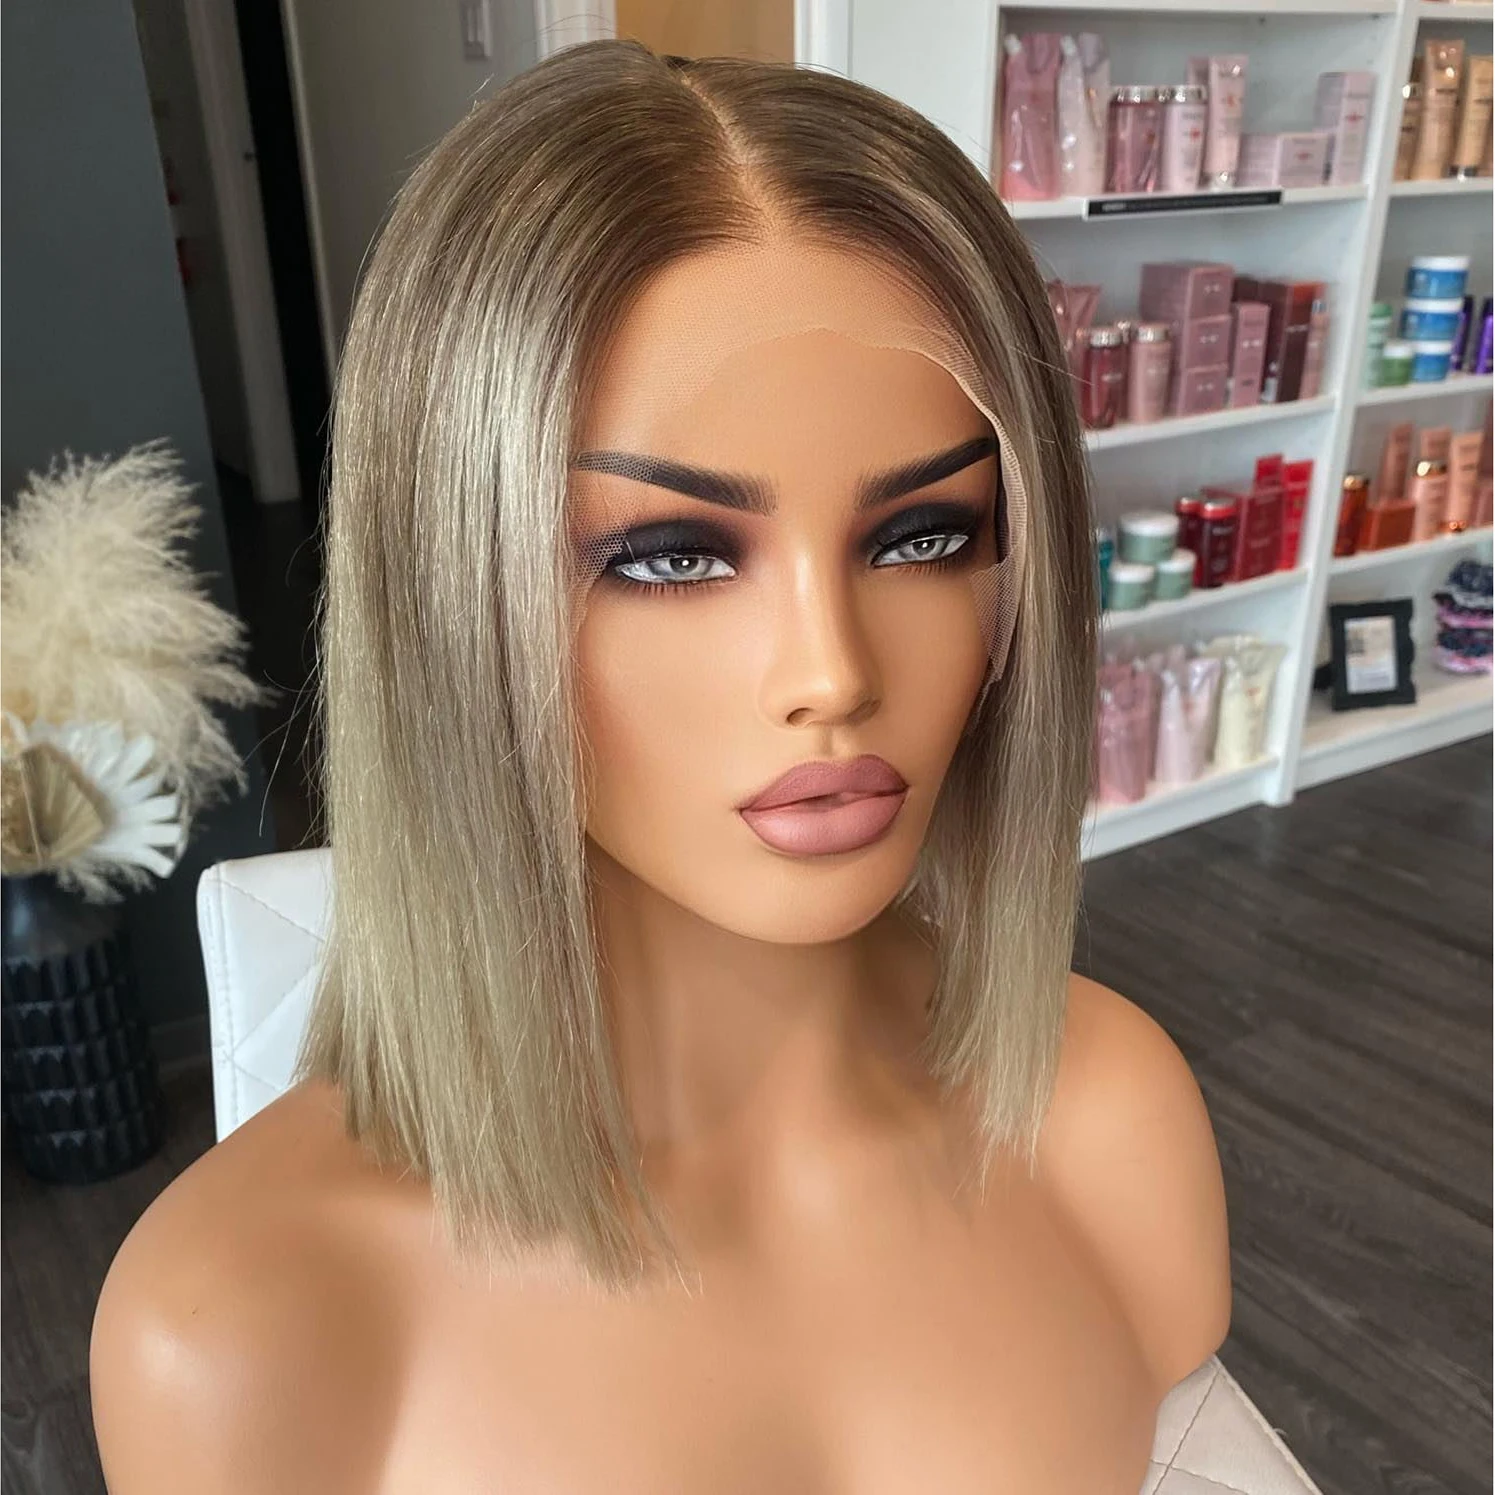 

Brazilian Virgin Human Hair Bob Wig Ash Blonde 13x4 Lace Front Wig Dark Roots Ombre Short Straight Wig for Women Glueless 150%